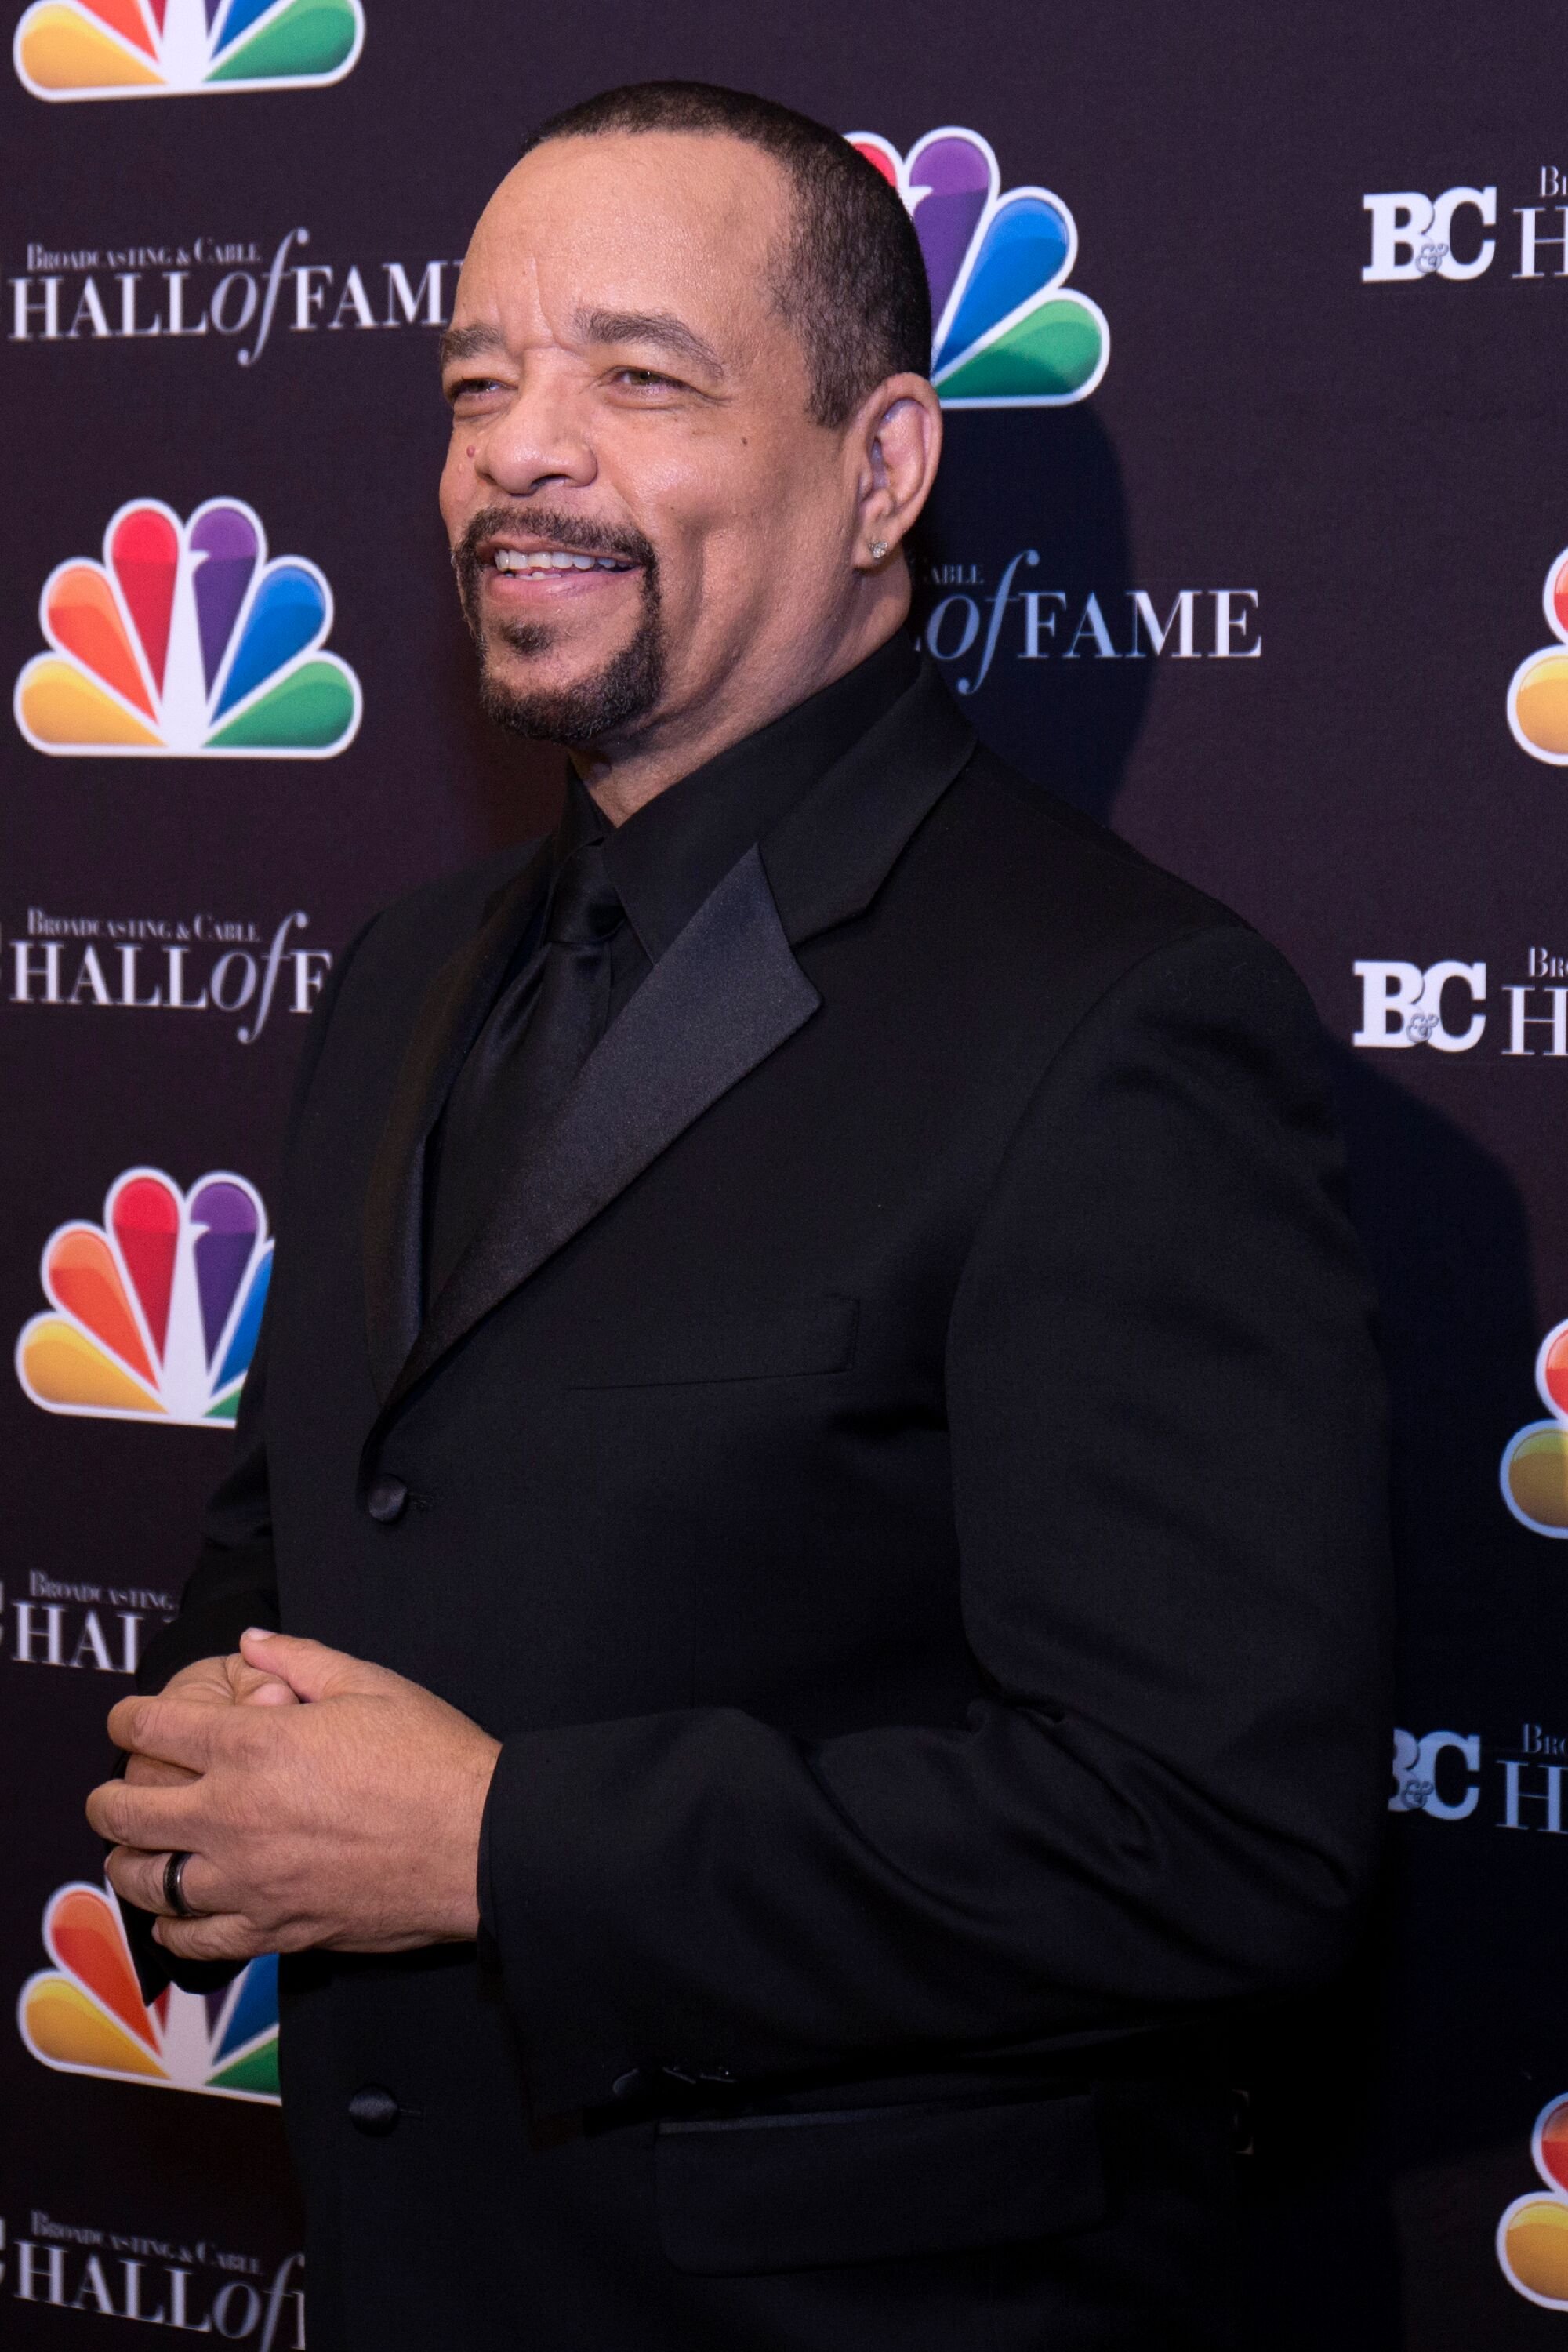 Ice-T attends the 2017 Broadcasting & Cable Hall Of Fame 27th Anniversary Gala. | Source: Getty Images